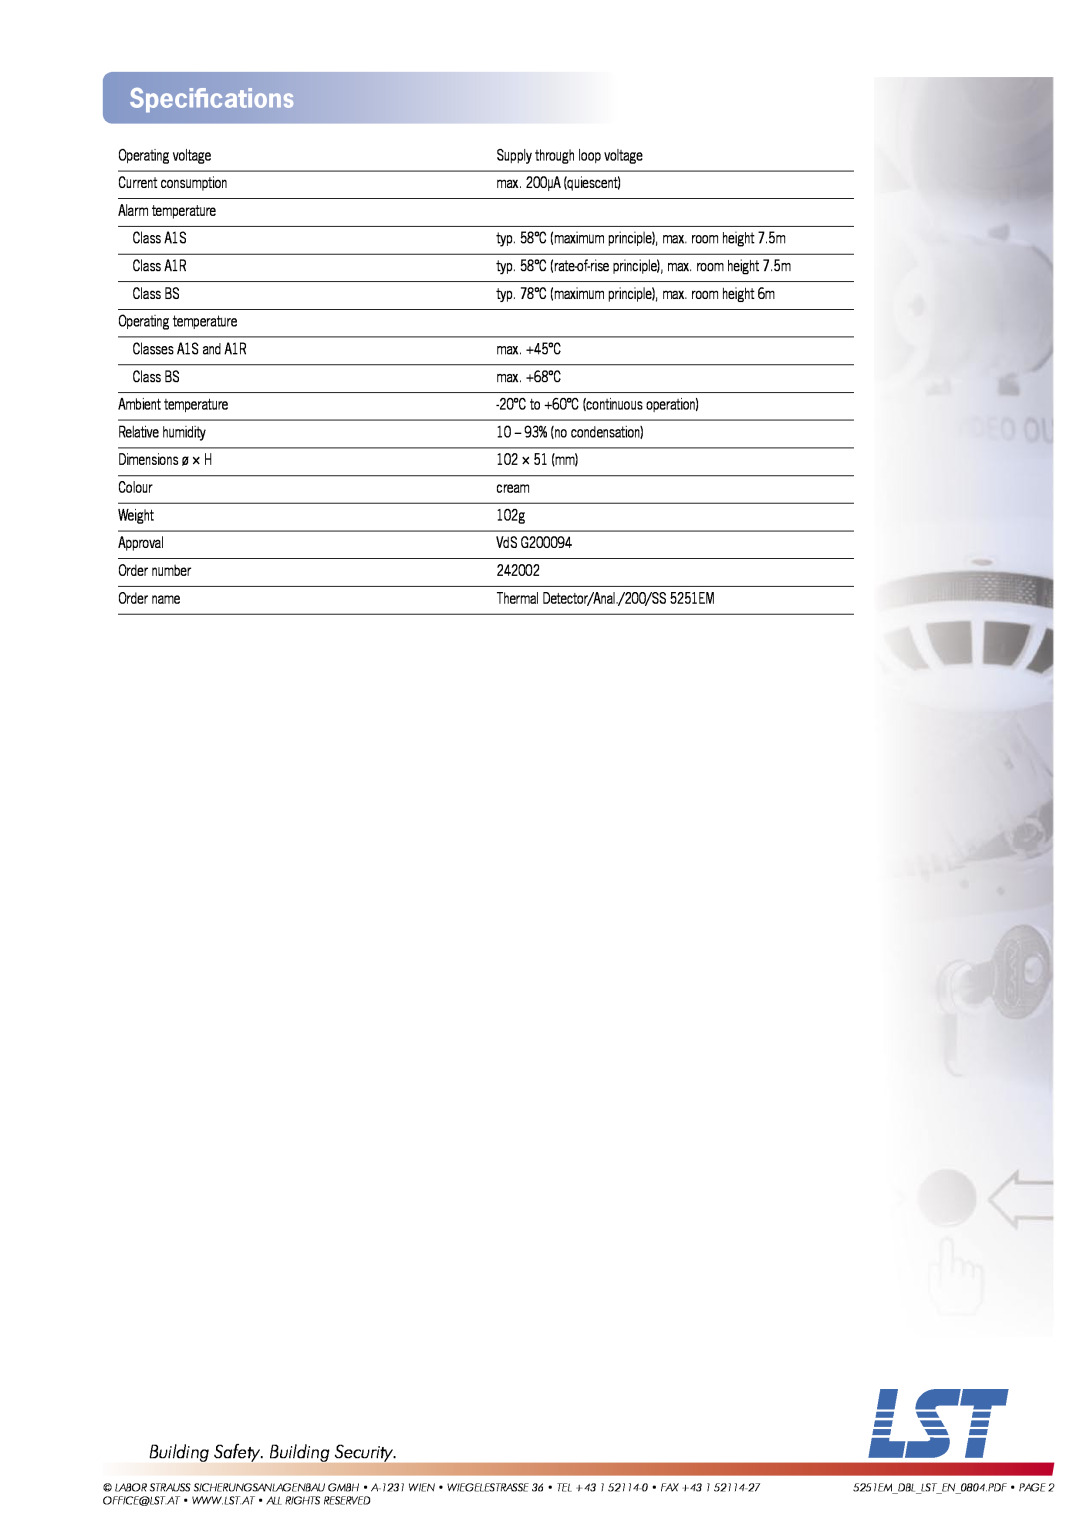 LST 5251EM manual Speciﬁcations, Building Safety. Building Security 